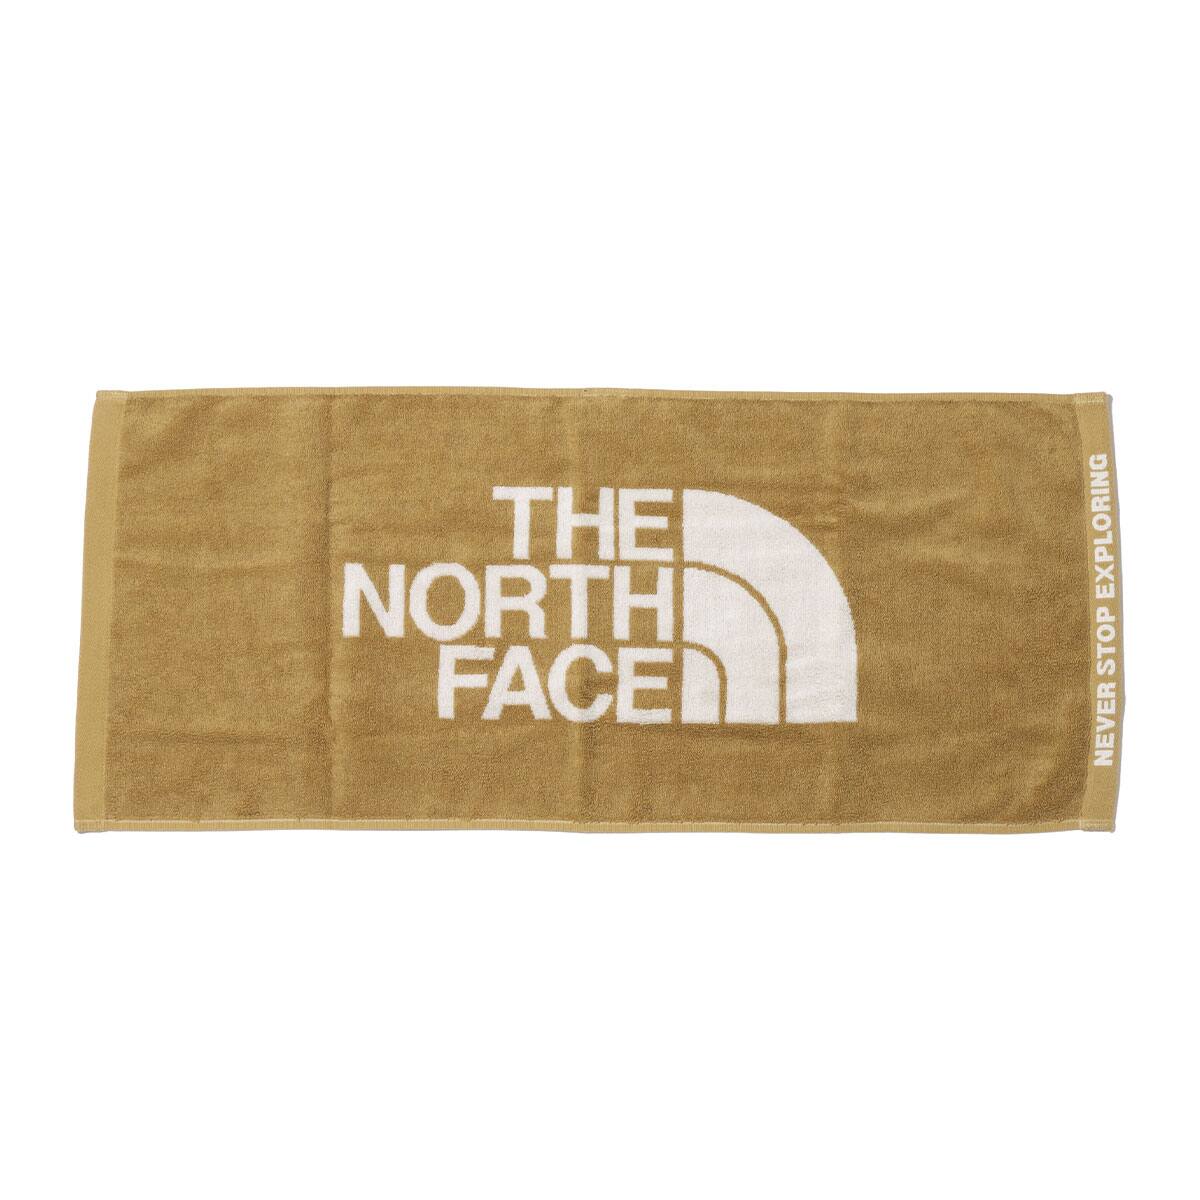 THE NORTH FACE COMFORT COTTON TOWEL M ケルプタン 23FW-I